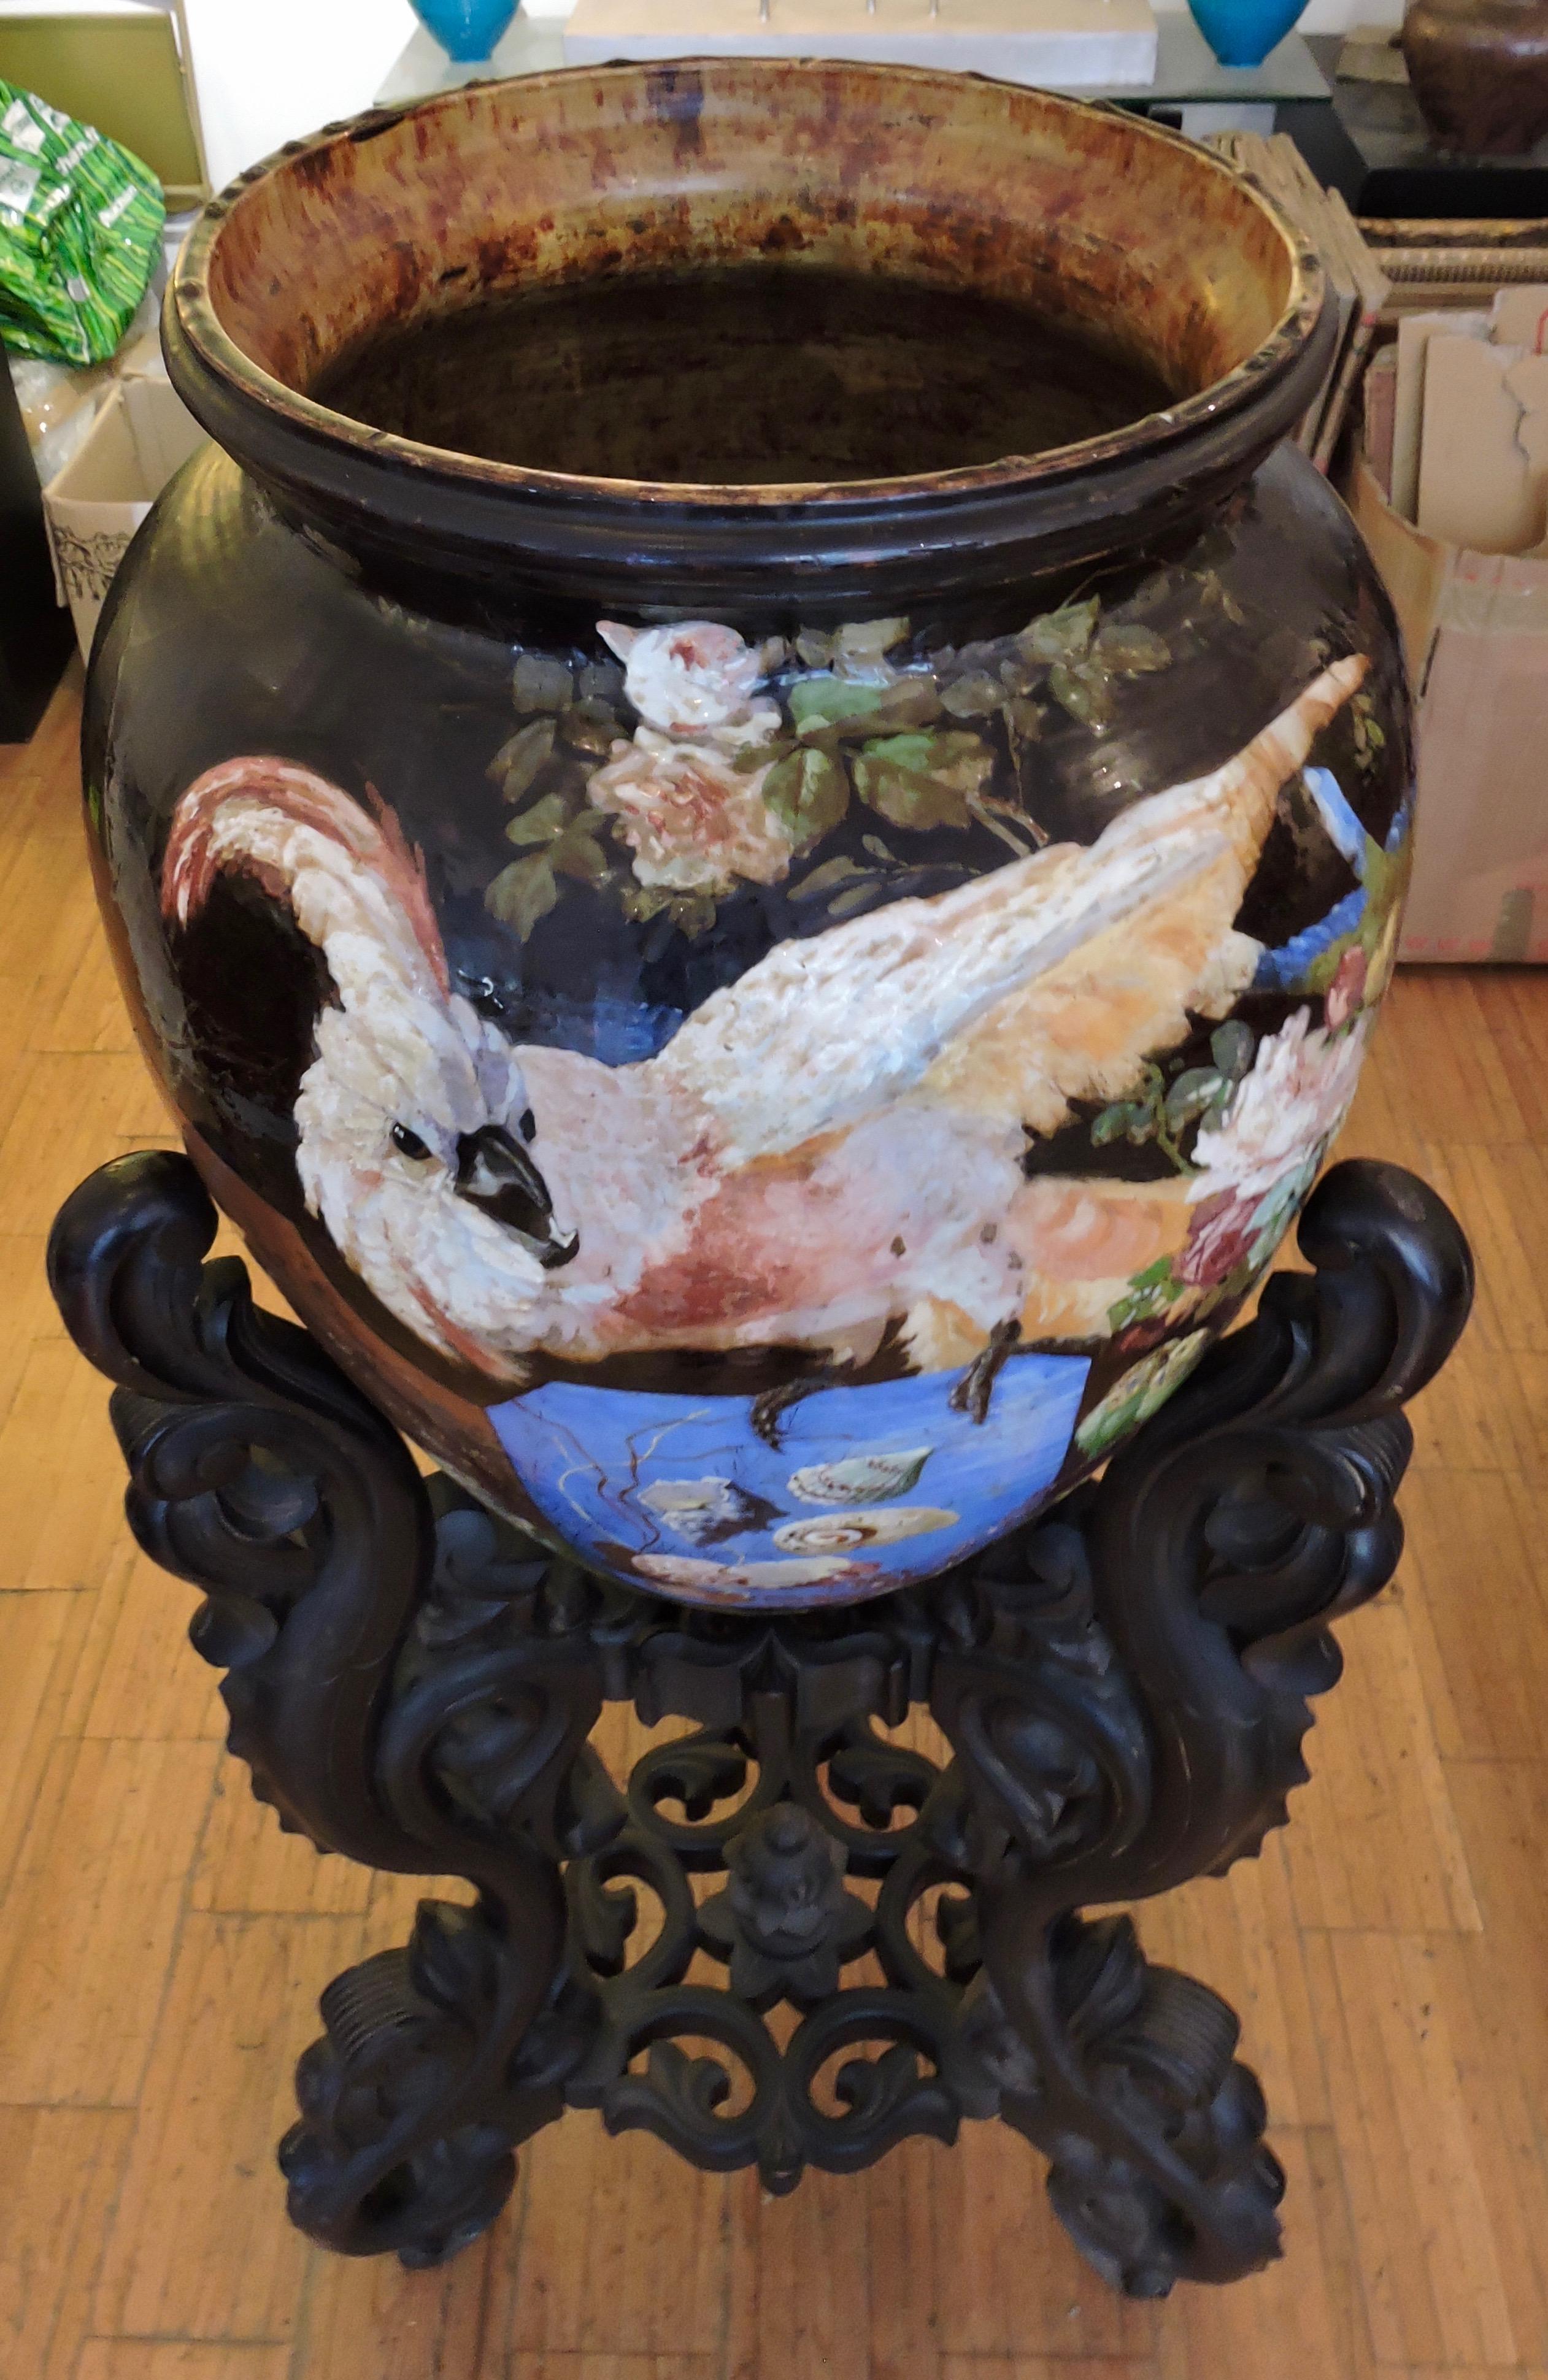 Late 19th Century  French Monumental Japonisme Ceramic Jar on a Wood Stand, circa 1890